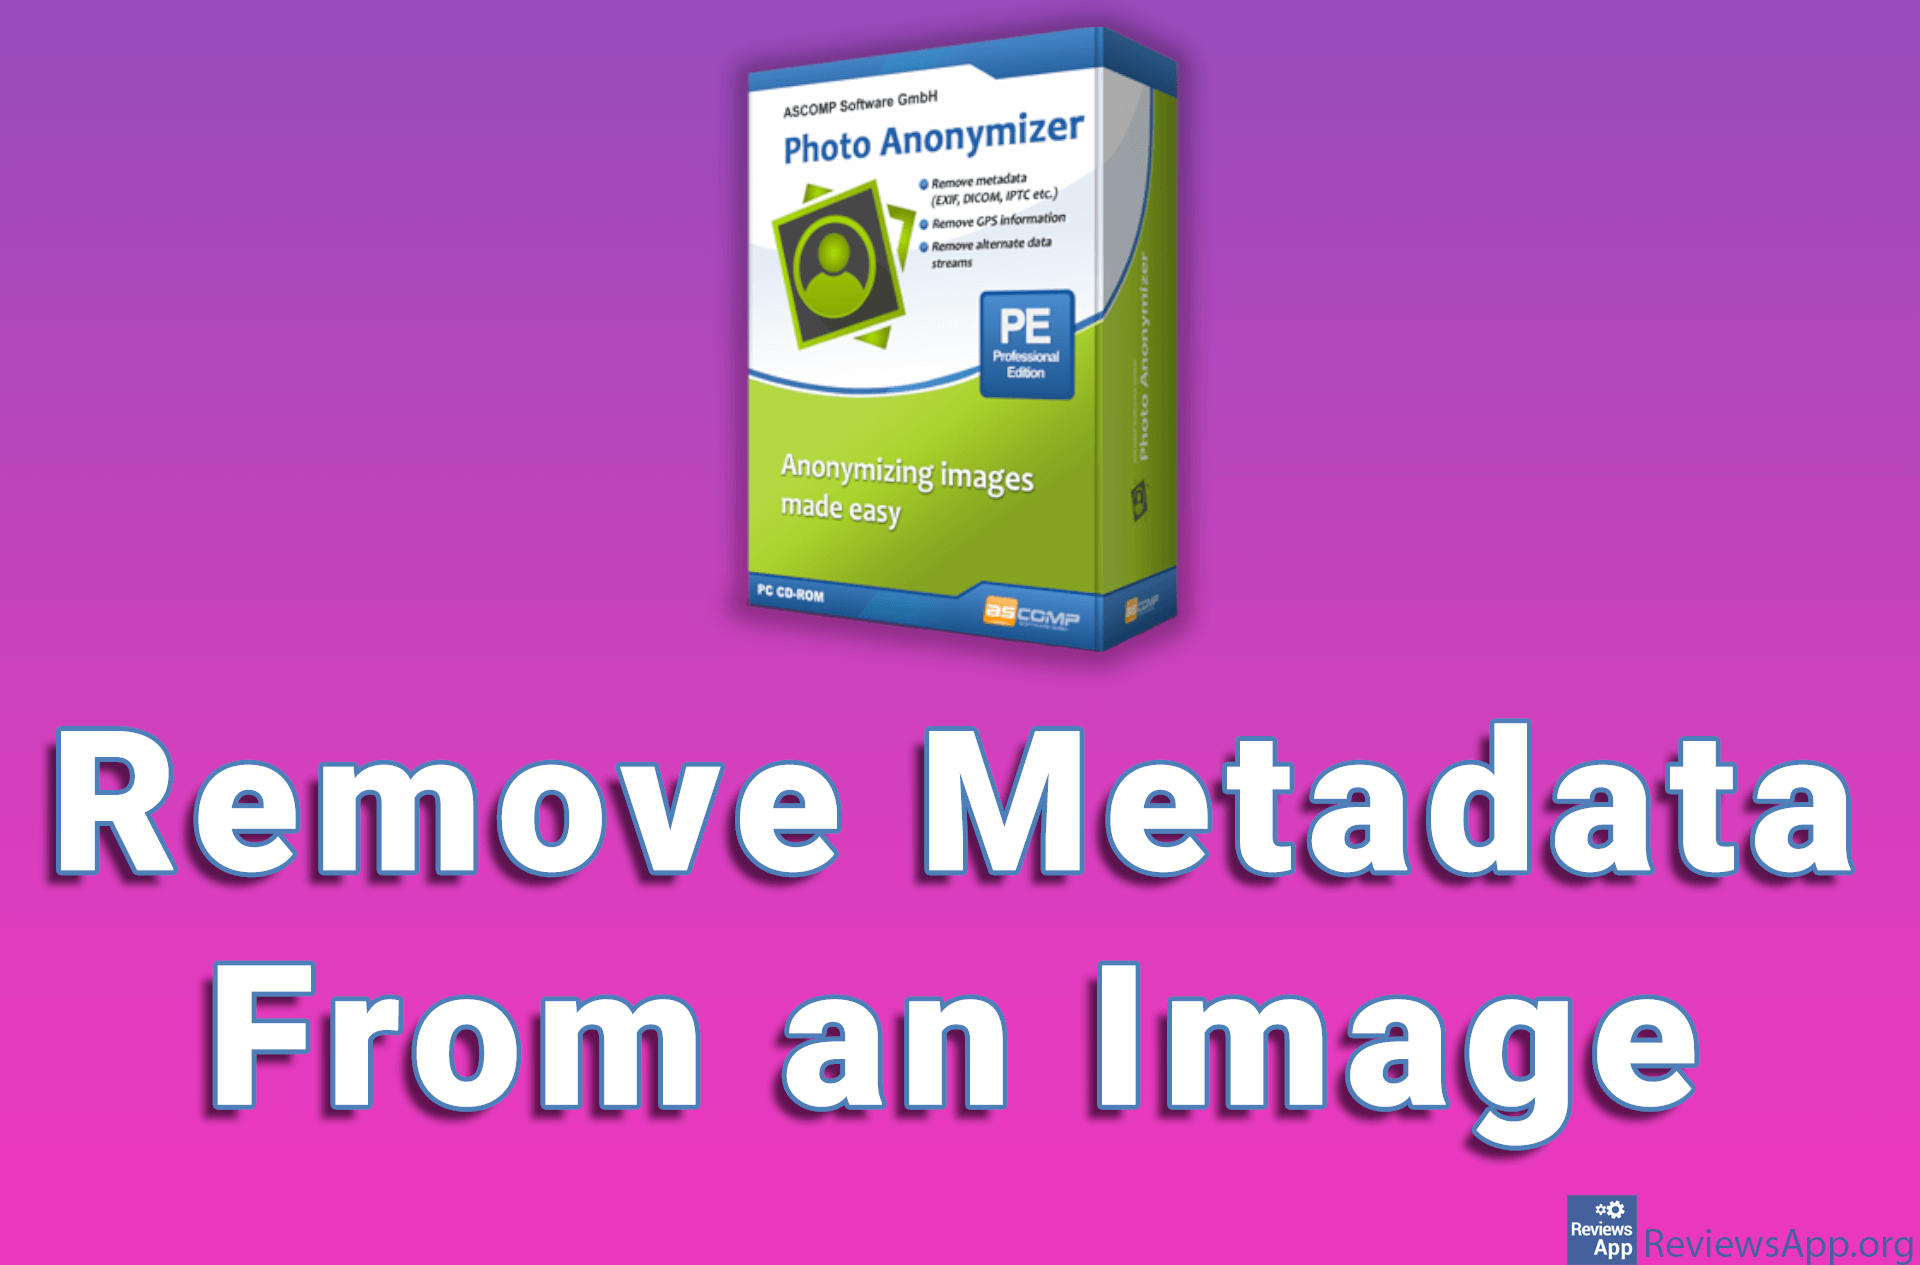 Photo Anonymizer – Remove Metadata From an Image